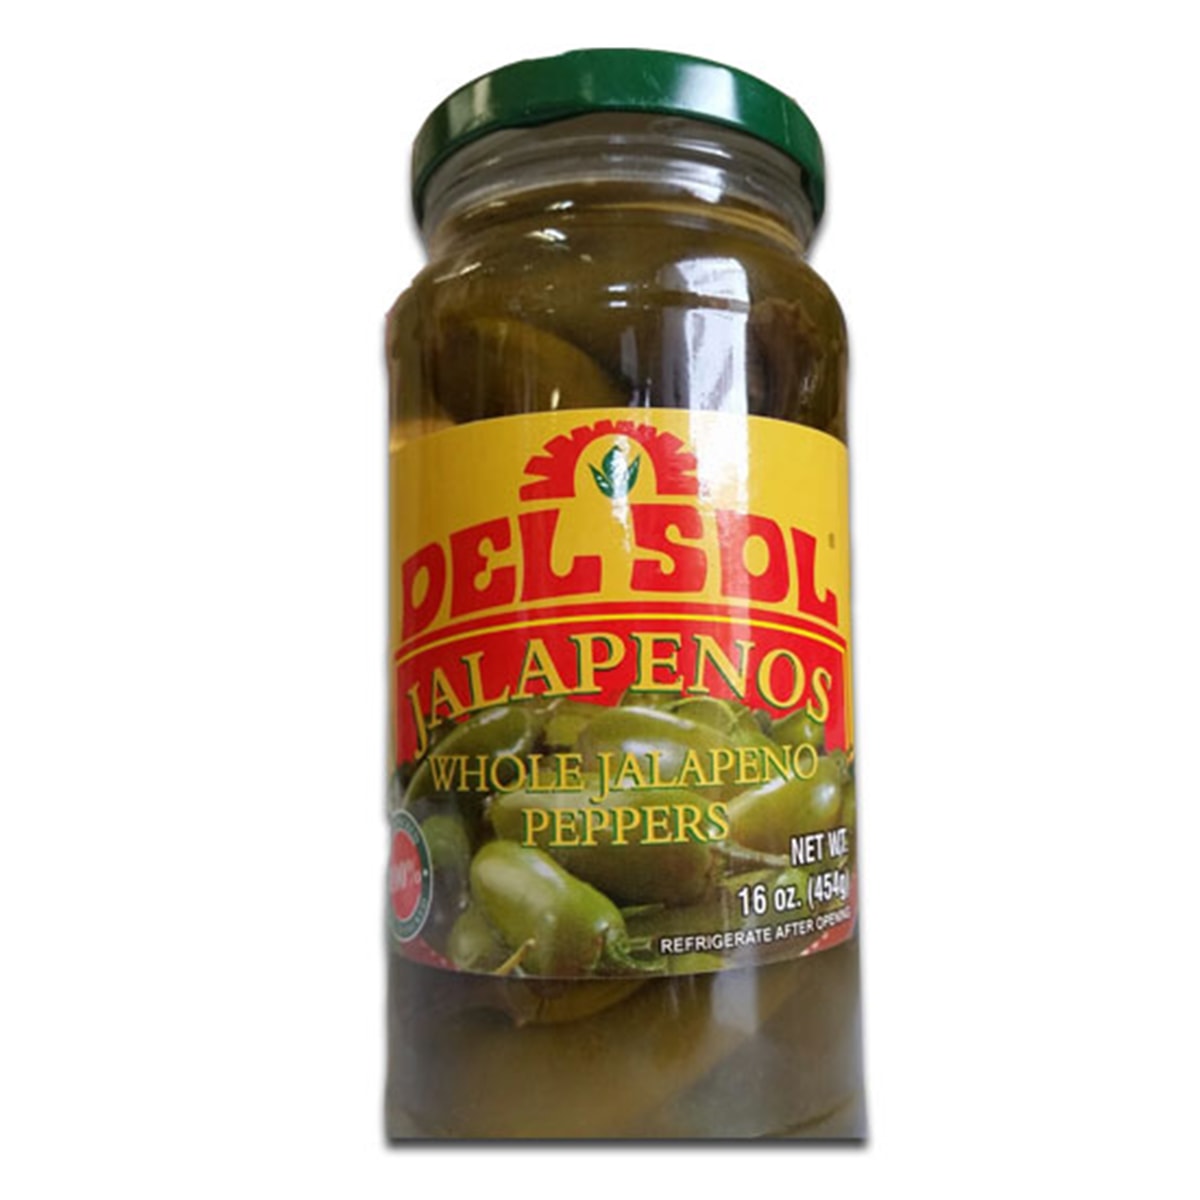 Buy Del Sol Jalapenos (Whole Jalapeno Peppers) - 454 gm